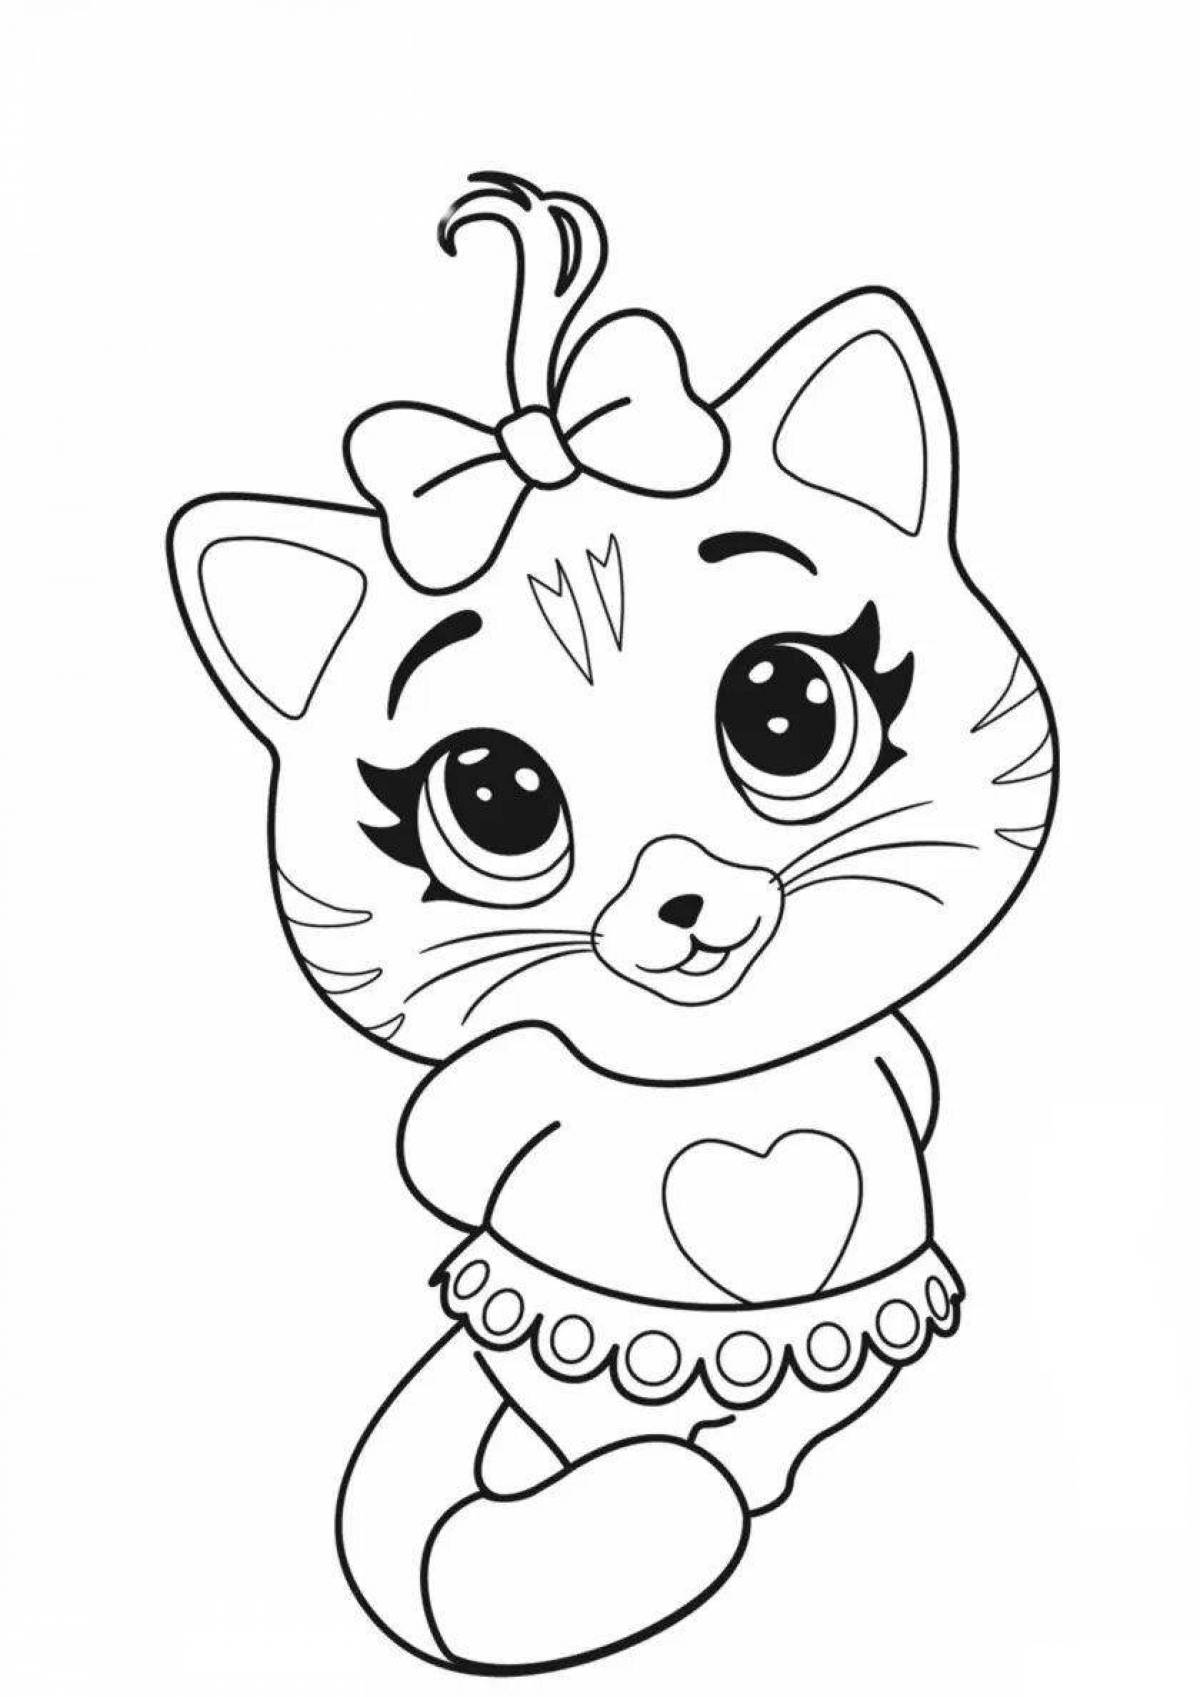 Cute and mischievous cat coloring page